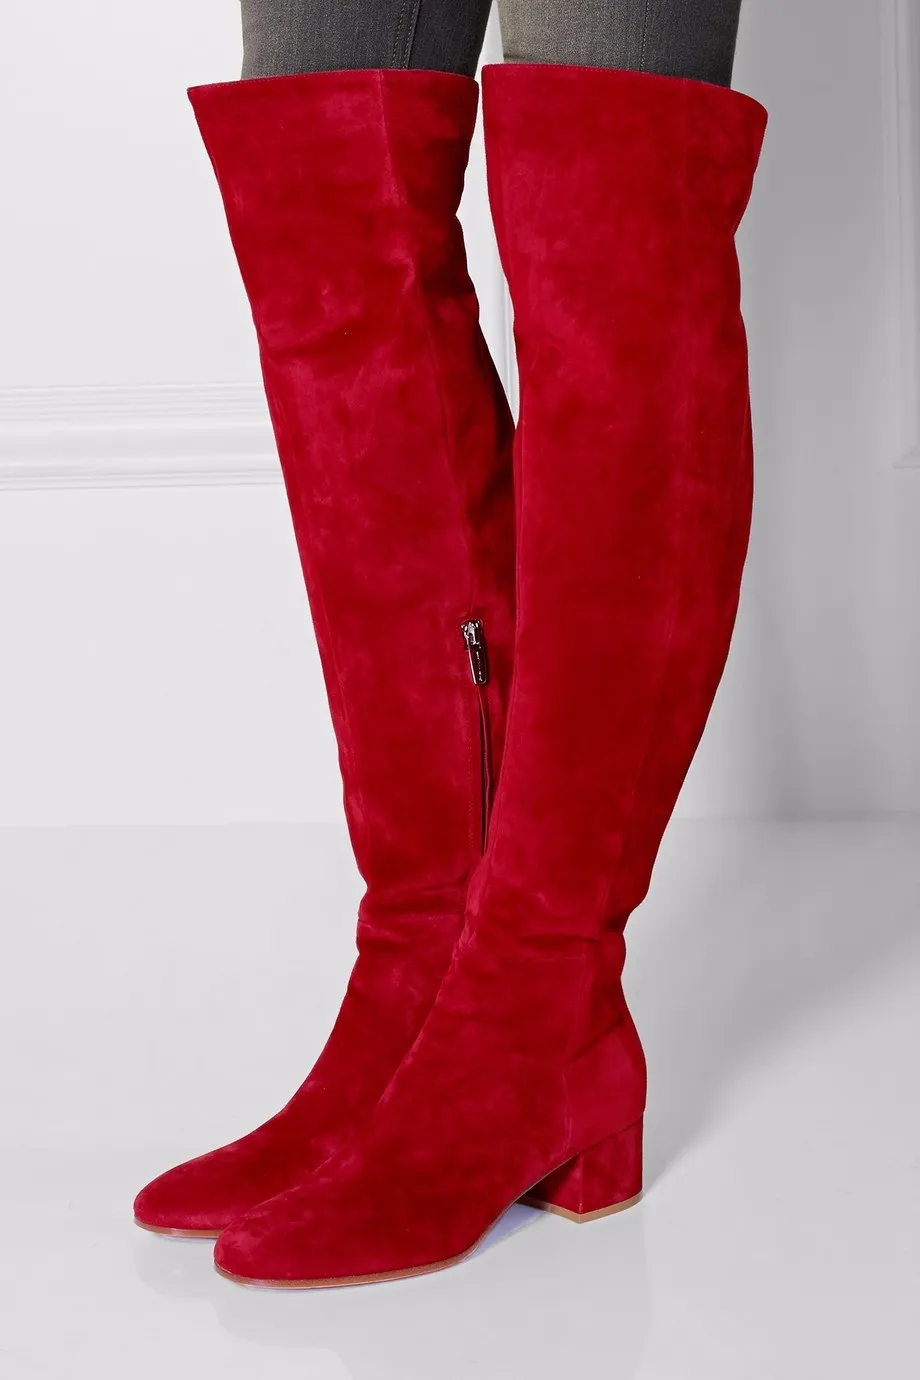 Over Knee Boots Red Flash Sales, 56% OFF | www.simbolics.cat